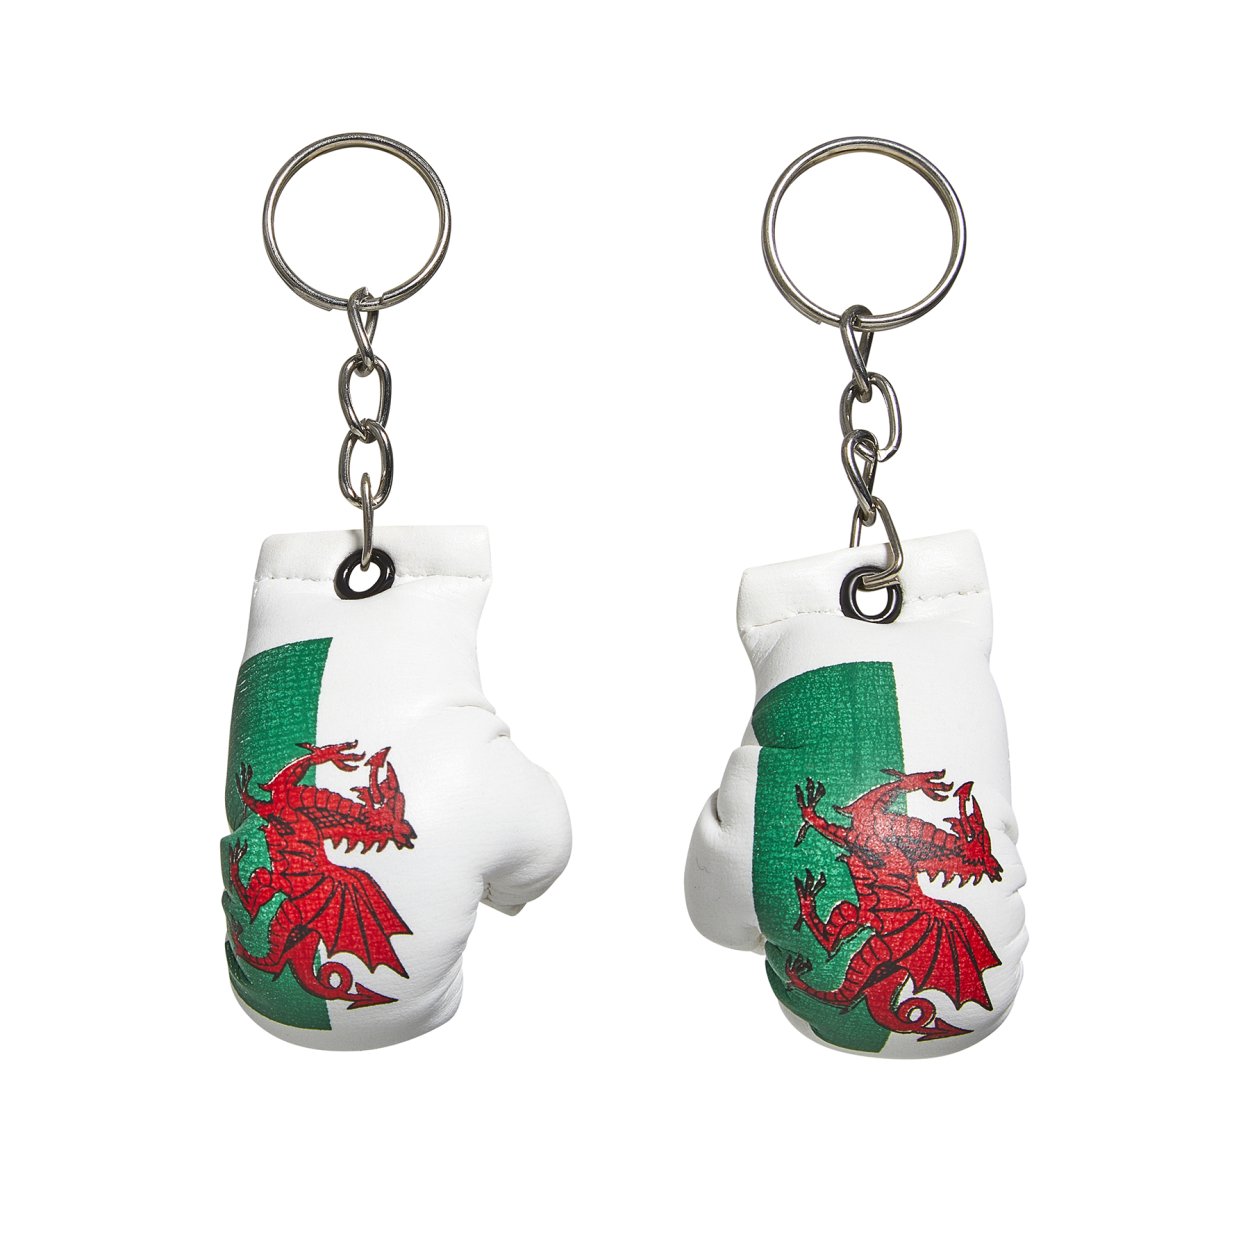 Country Flag Keyrings - Wales - Click Image to Close